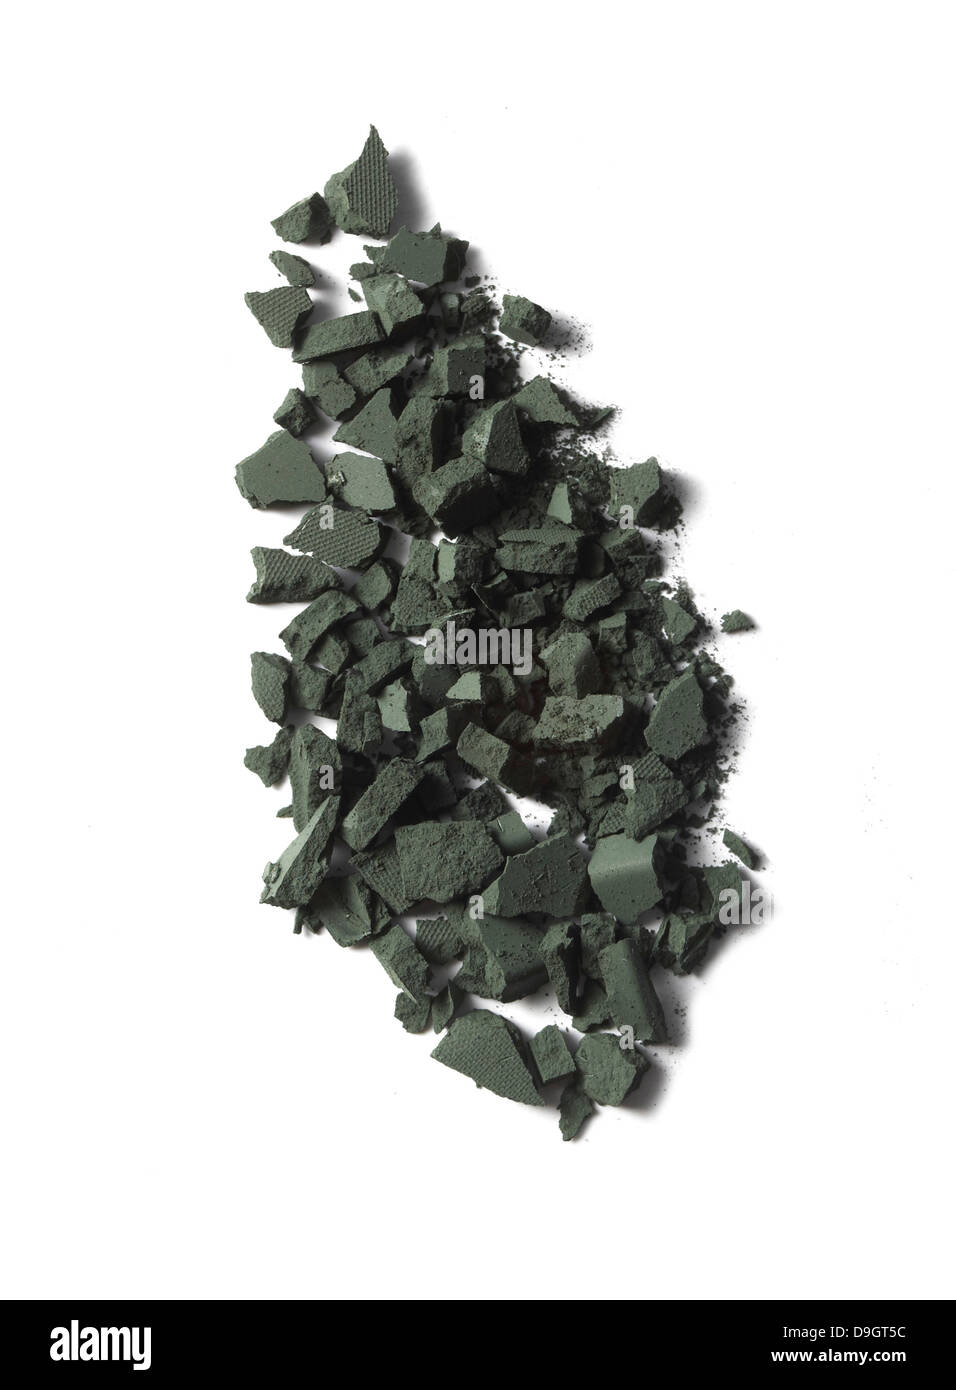 blue green eyeshadow loose powder pile cut out onto a white background Stock Photo